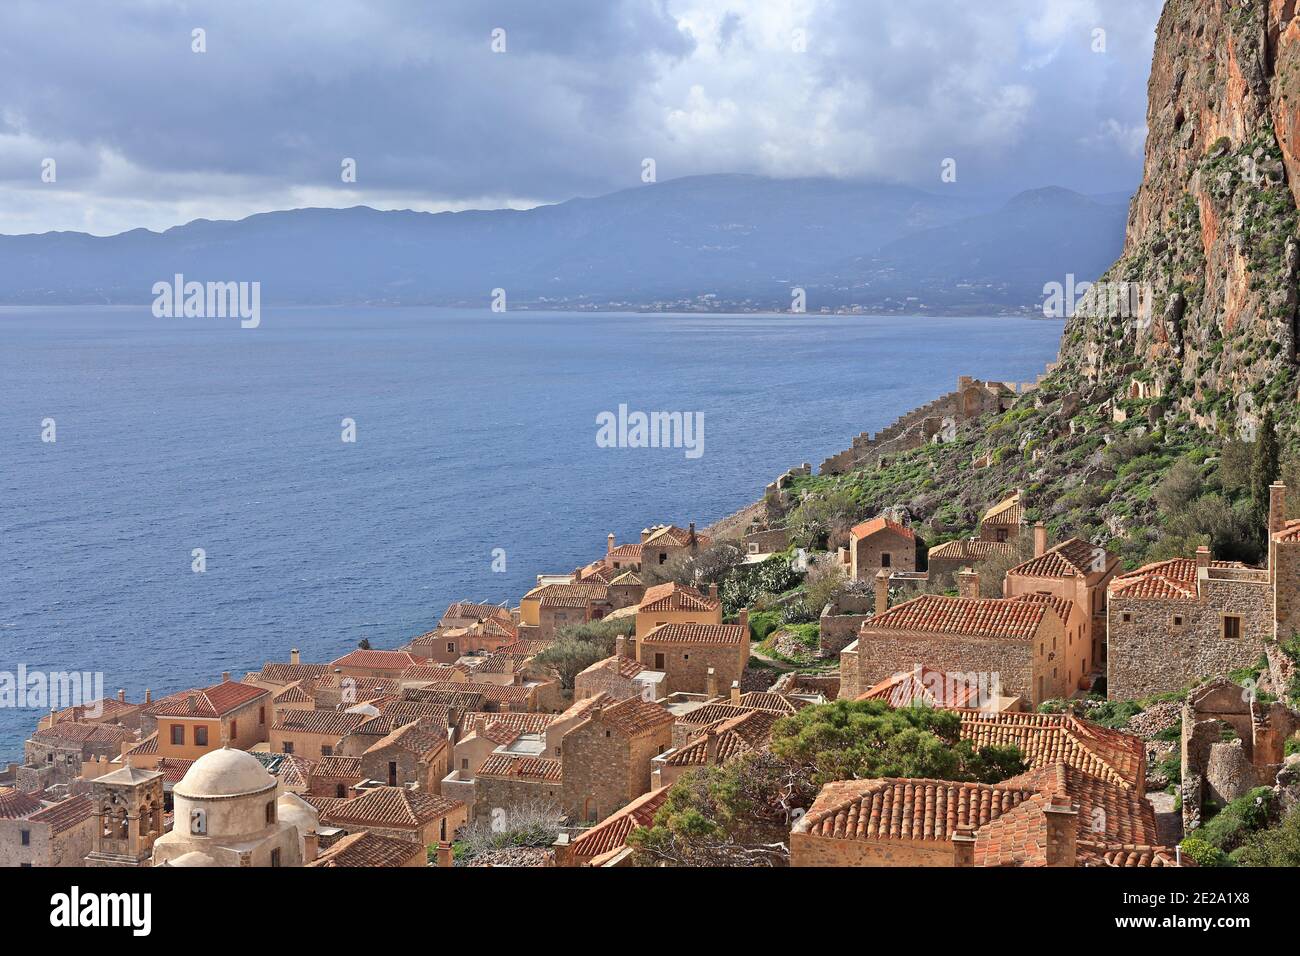 Monemvasia town, panoramic view from the top of the rock hill where this medieval town is built, in Laconia region, Peloponnese, Greece, Europe. Stock Photo